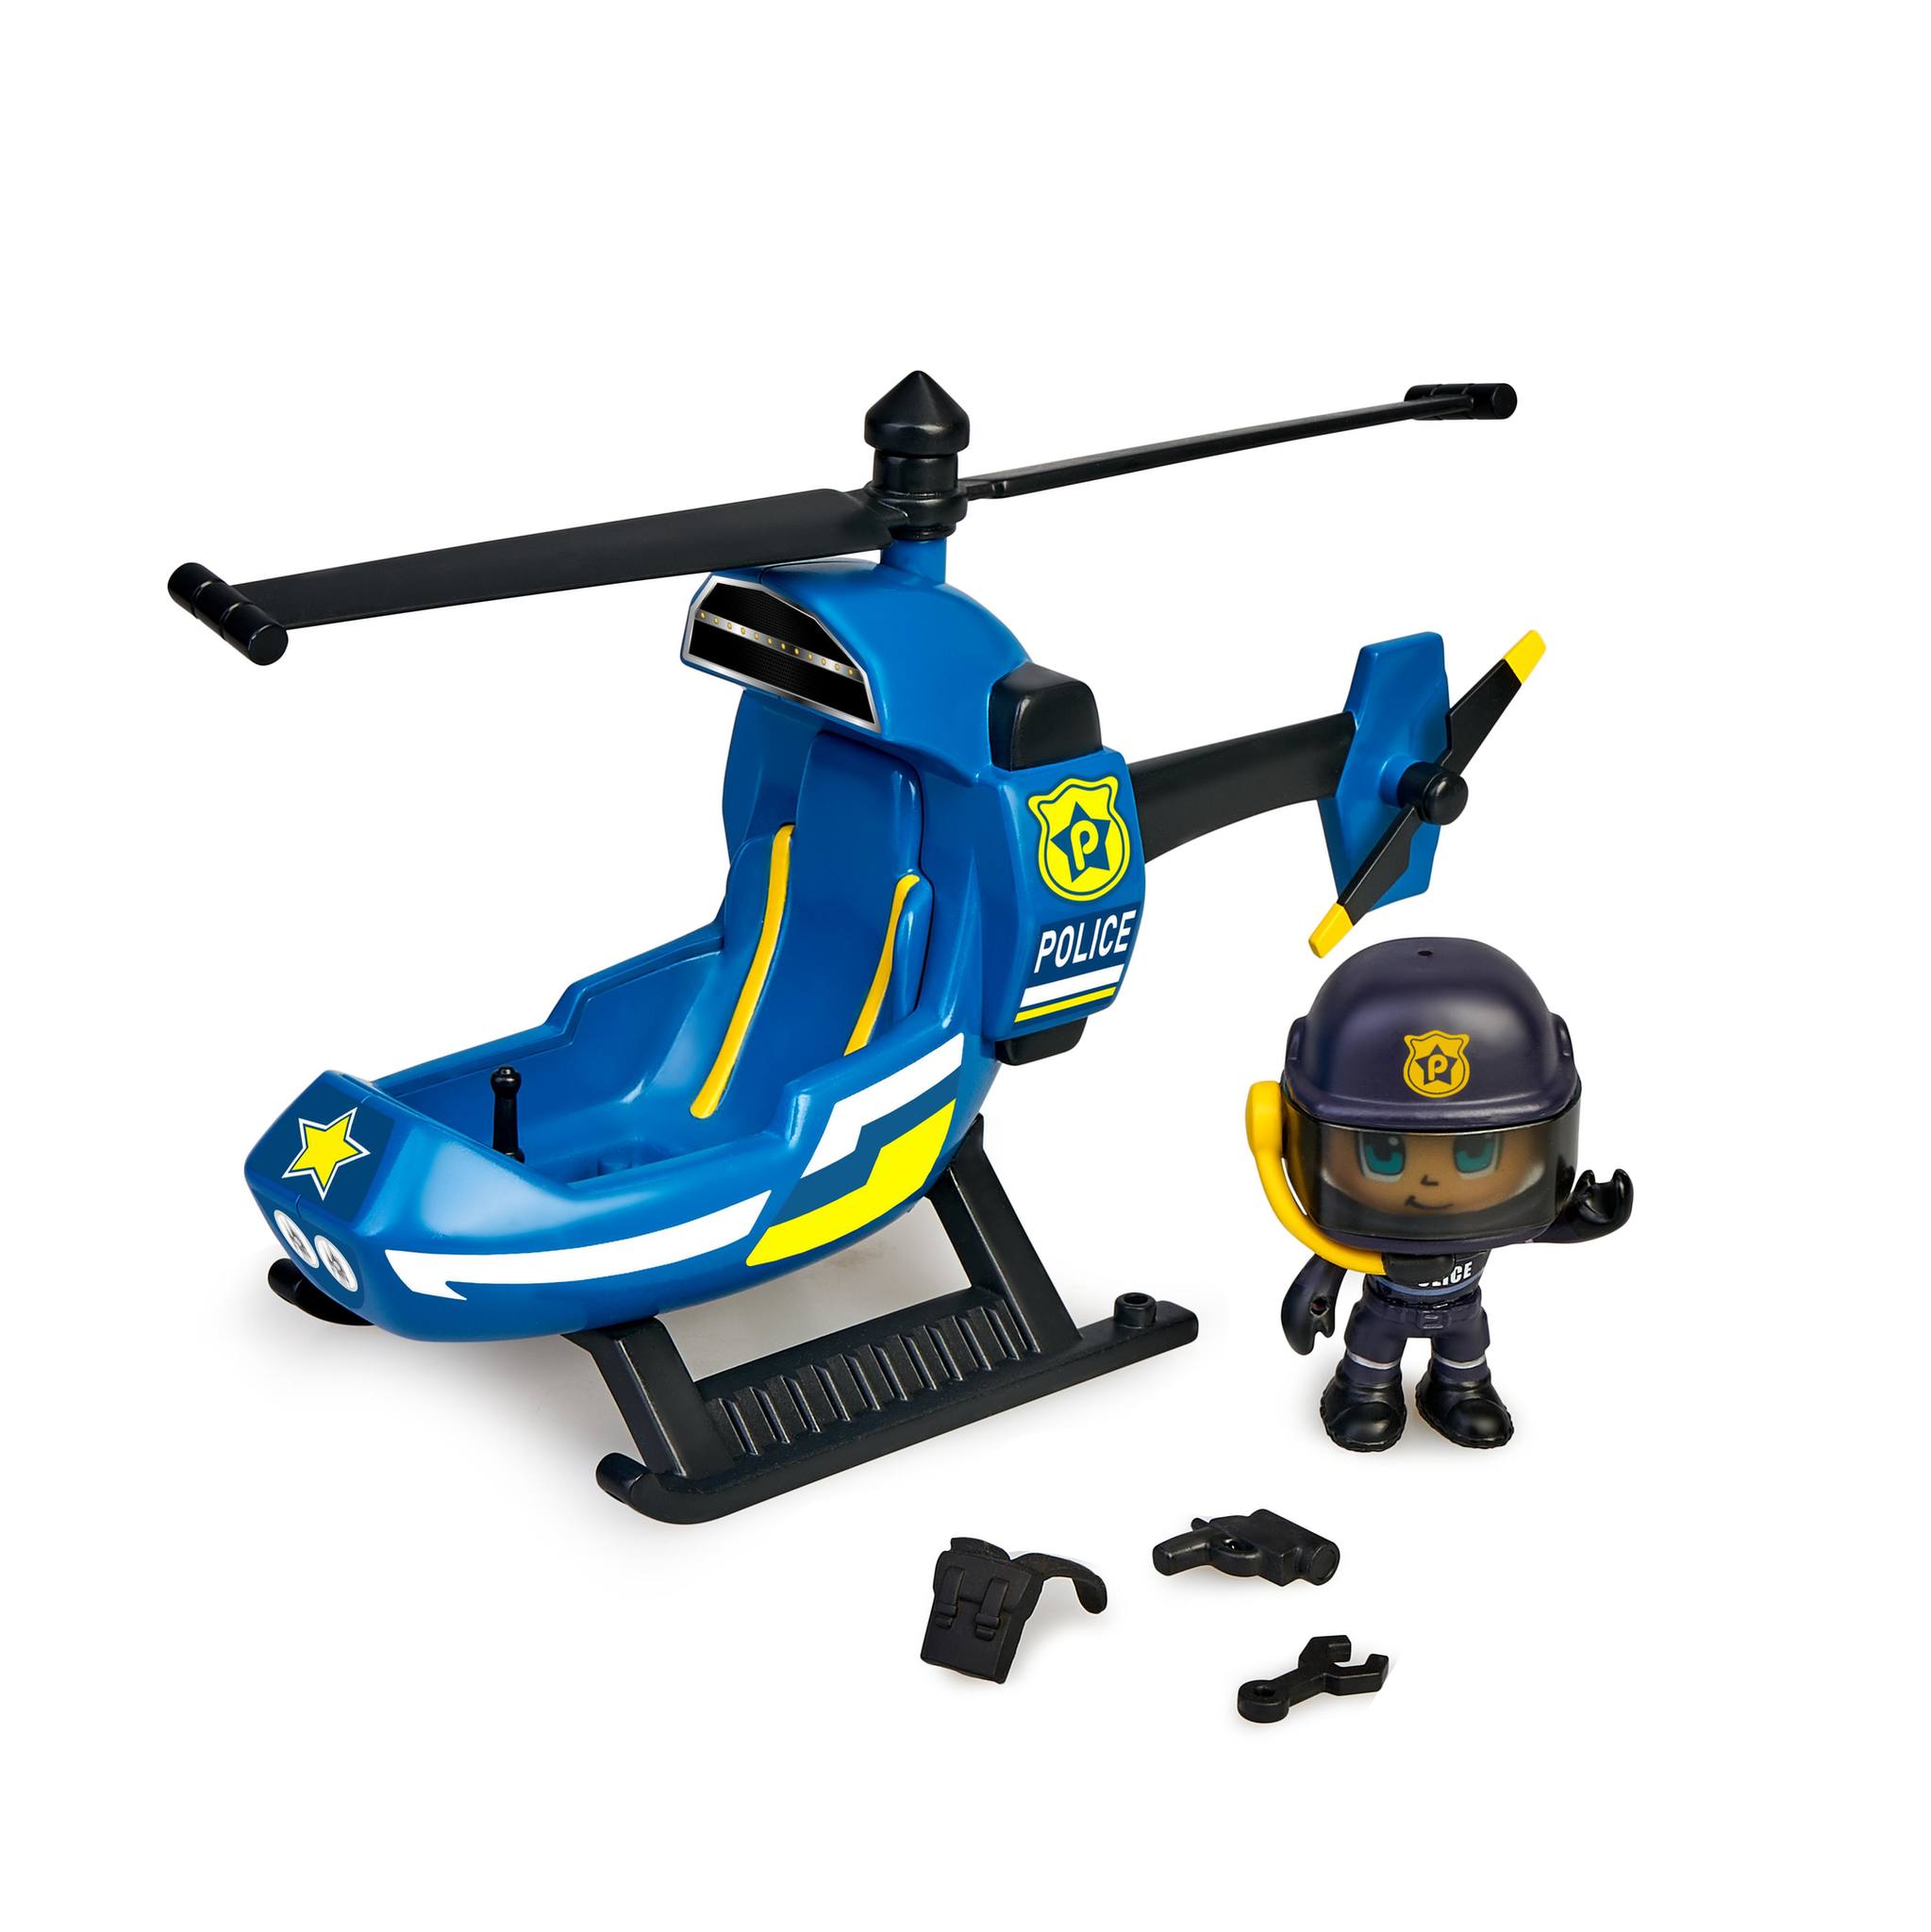 PIN Y PON MINI HELICOPTER 700017037